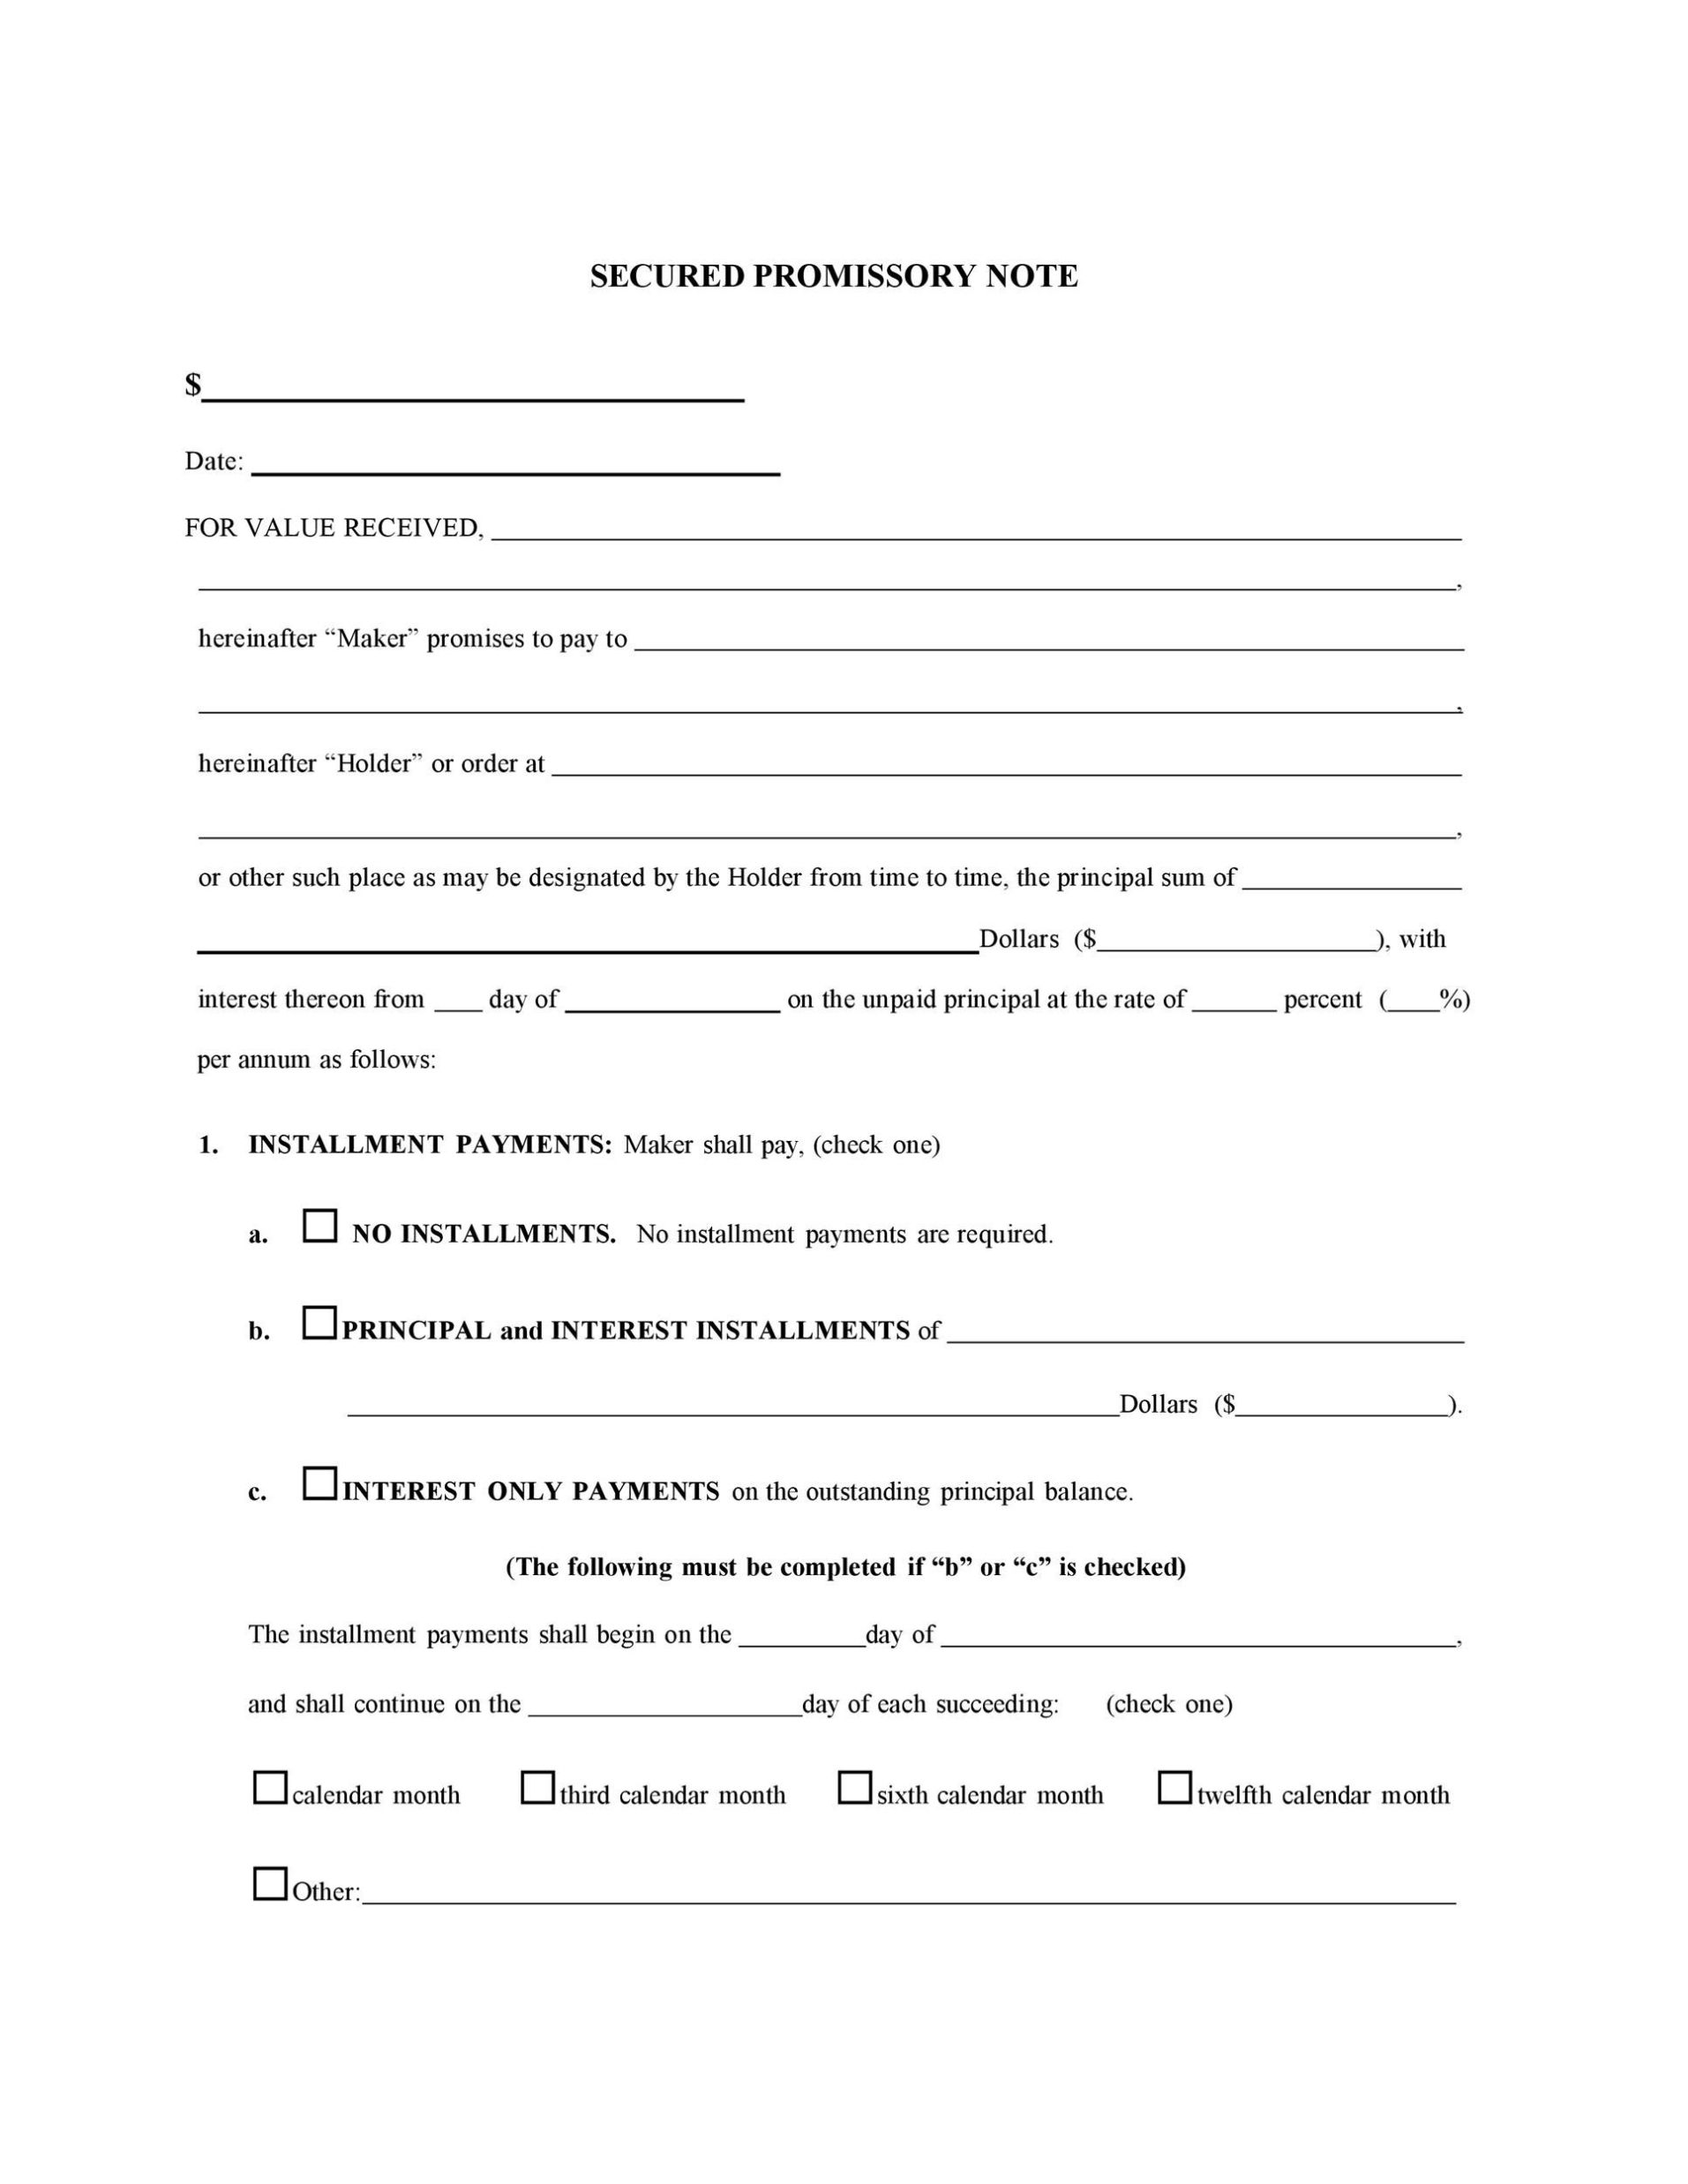 45 Free Promissory Note Templates & Forms [Word & Pdf] - Template Lab Intended For Auto Promissory Note Template